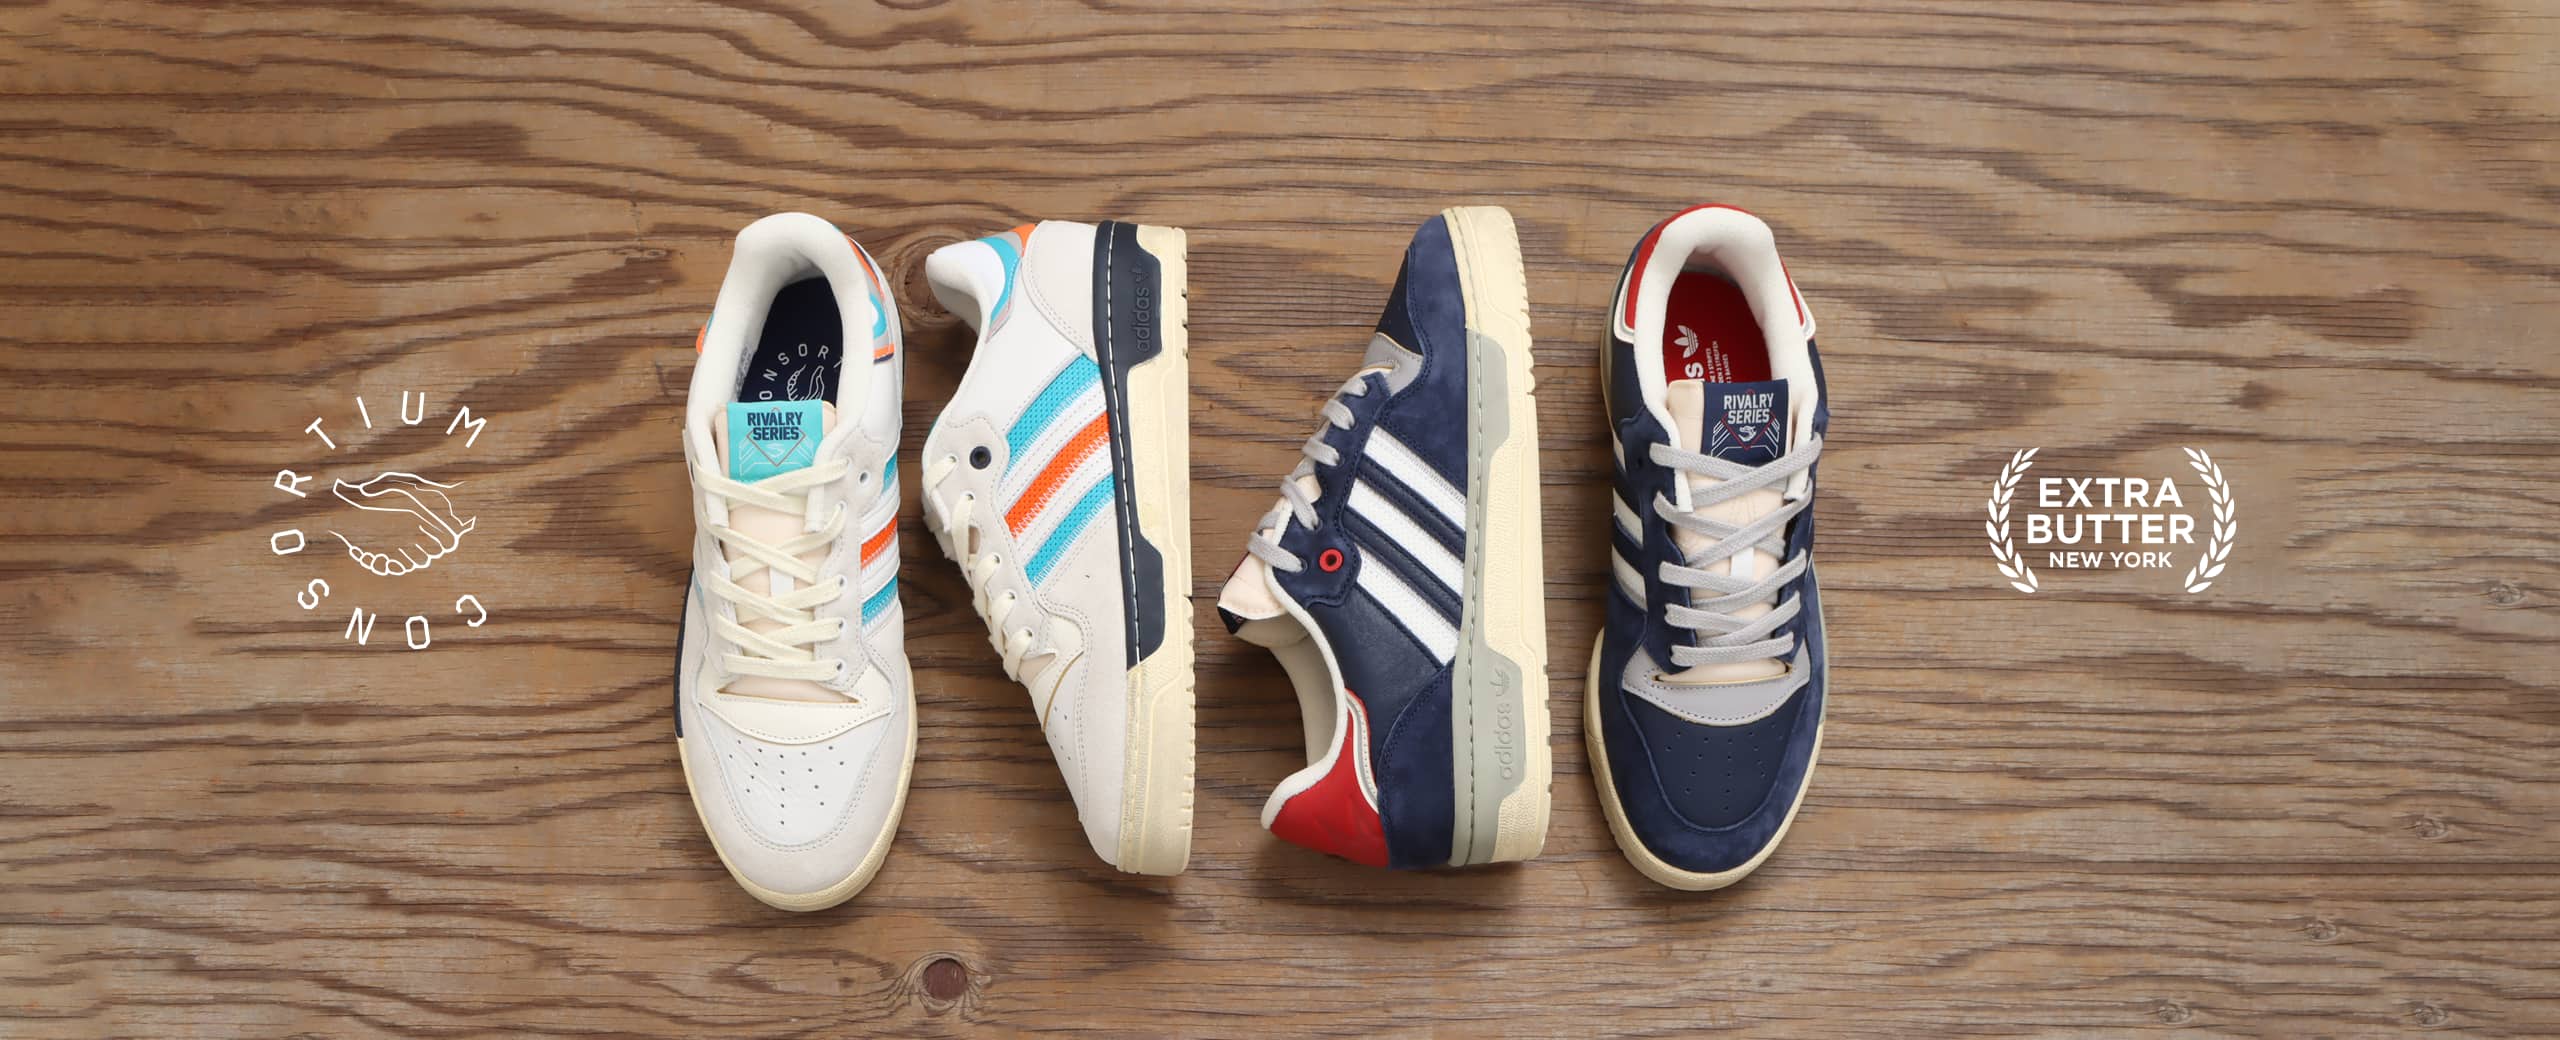 "adidas Originals RIVALRY LOW EXTRA BUTTER"